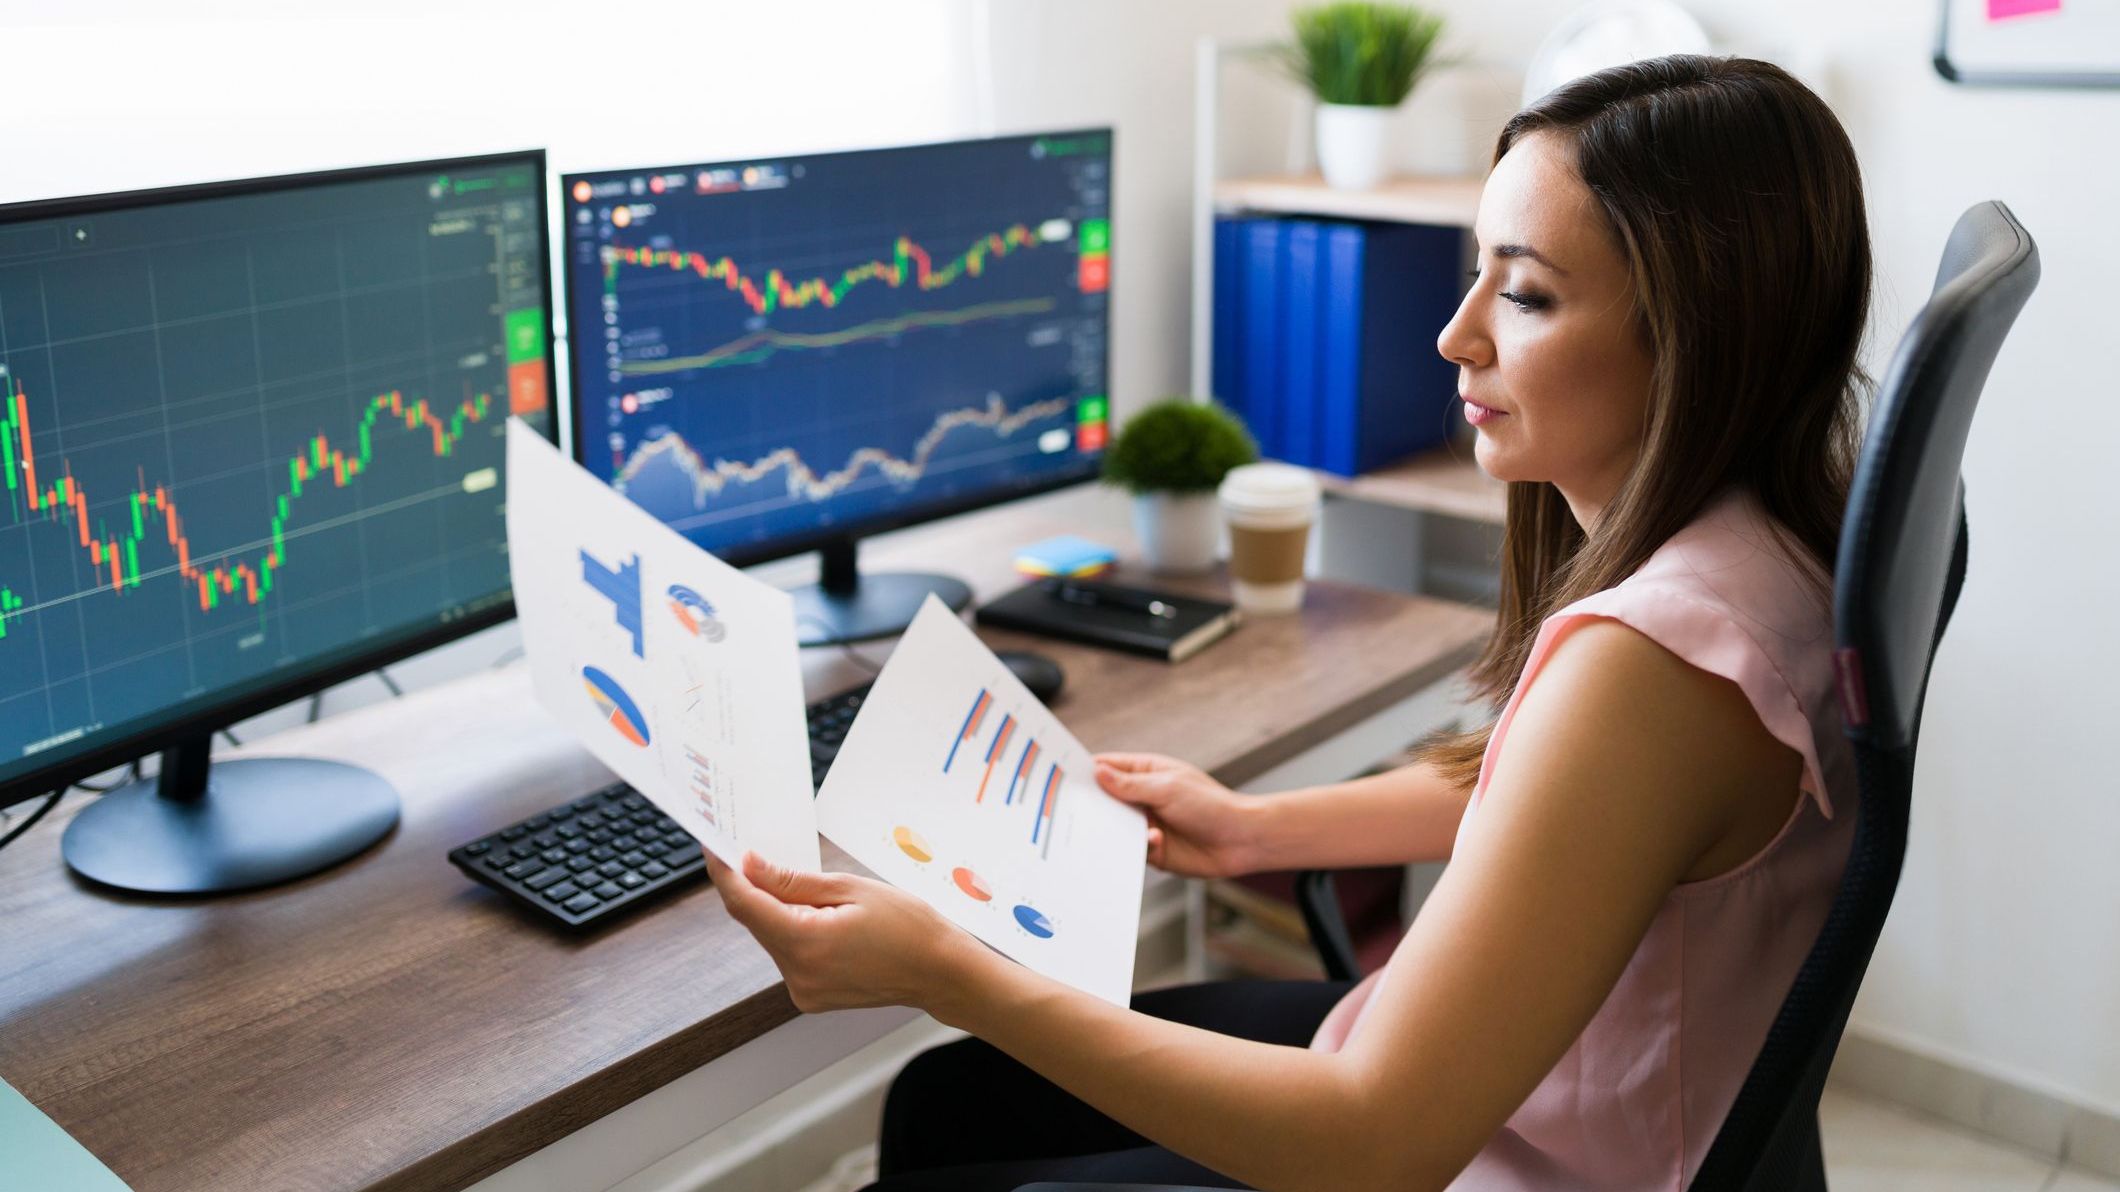 A stockbroker looks over charts and graphs at her desk.